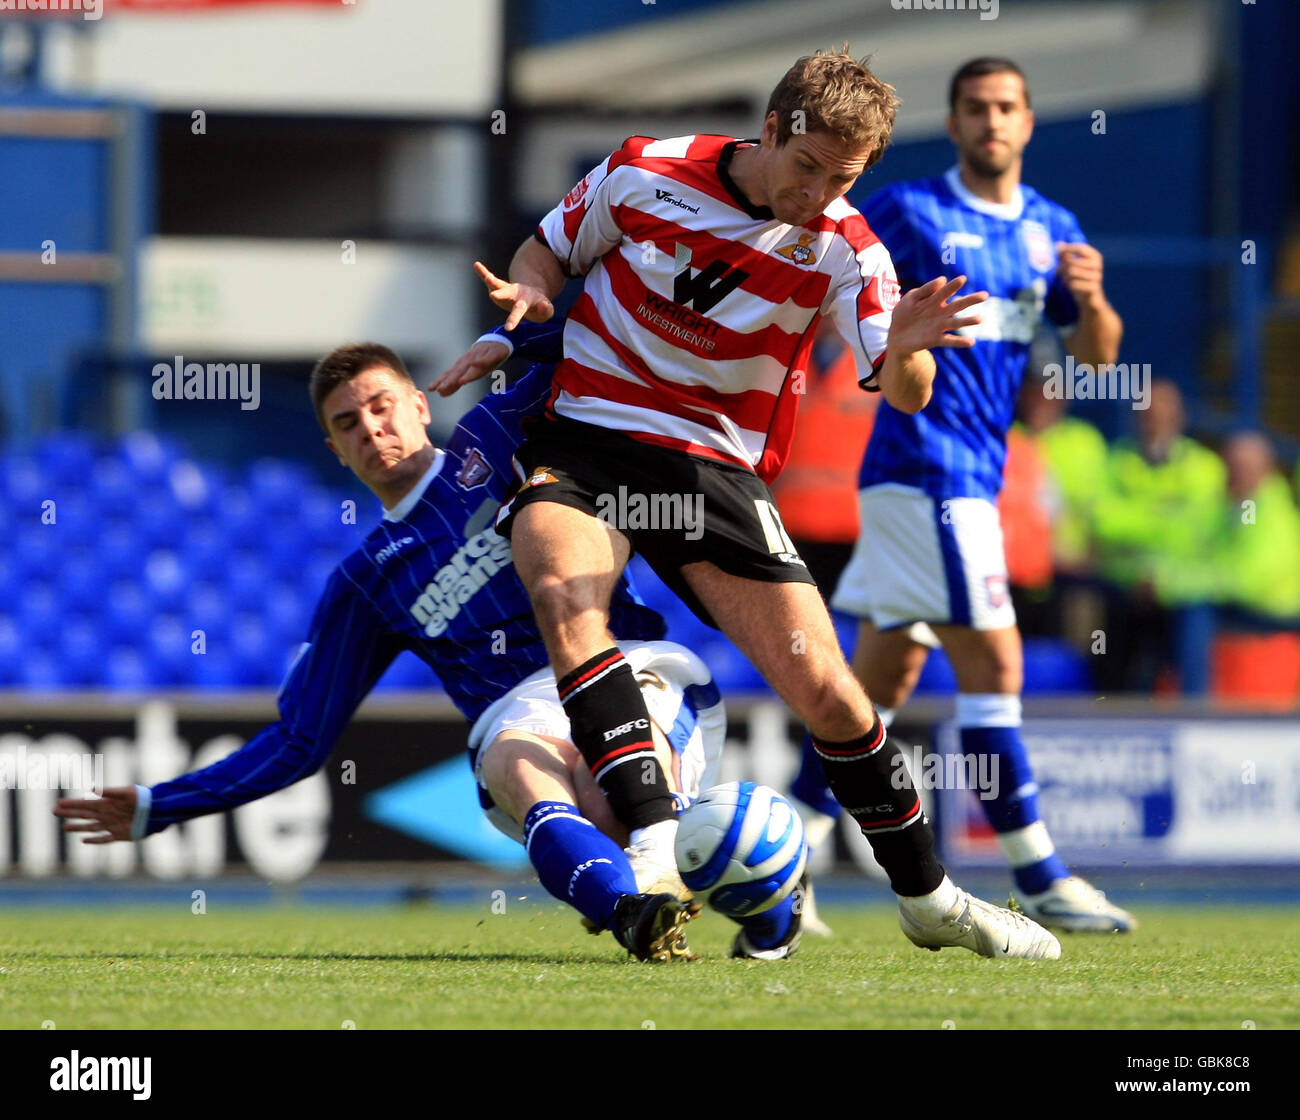 Ipswich Town's Owen Garvan (left) tackles Doncaster Rovers' Martin Woods (right) during the Coca-Cola Football League Championship match at Portman Road, Ipswich. Stock Photo